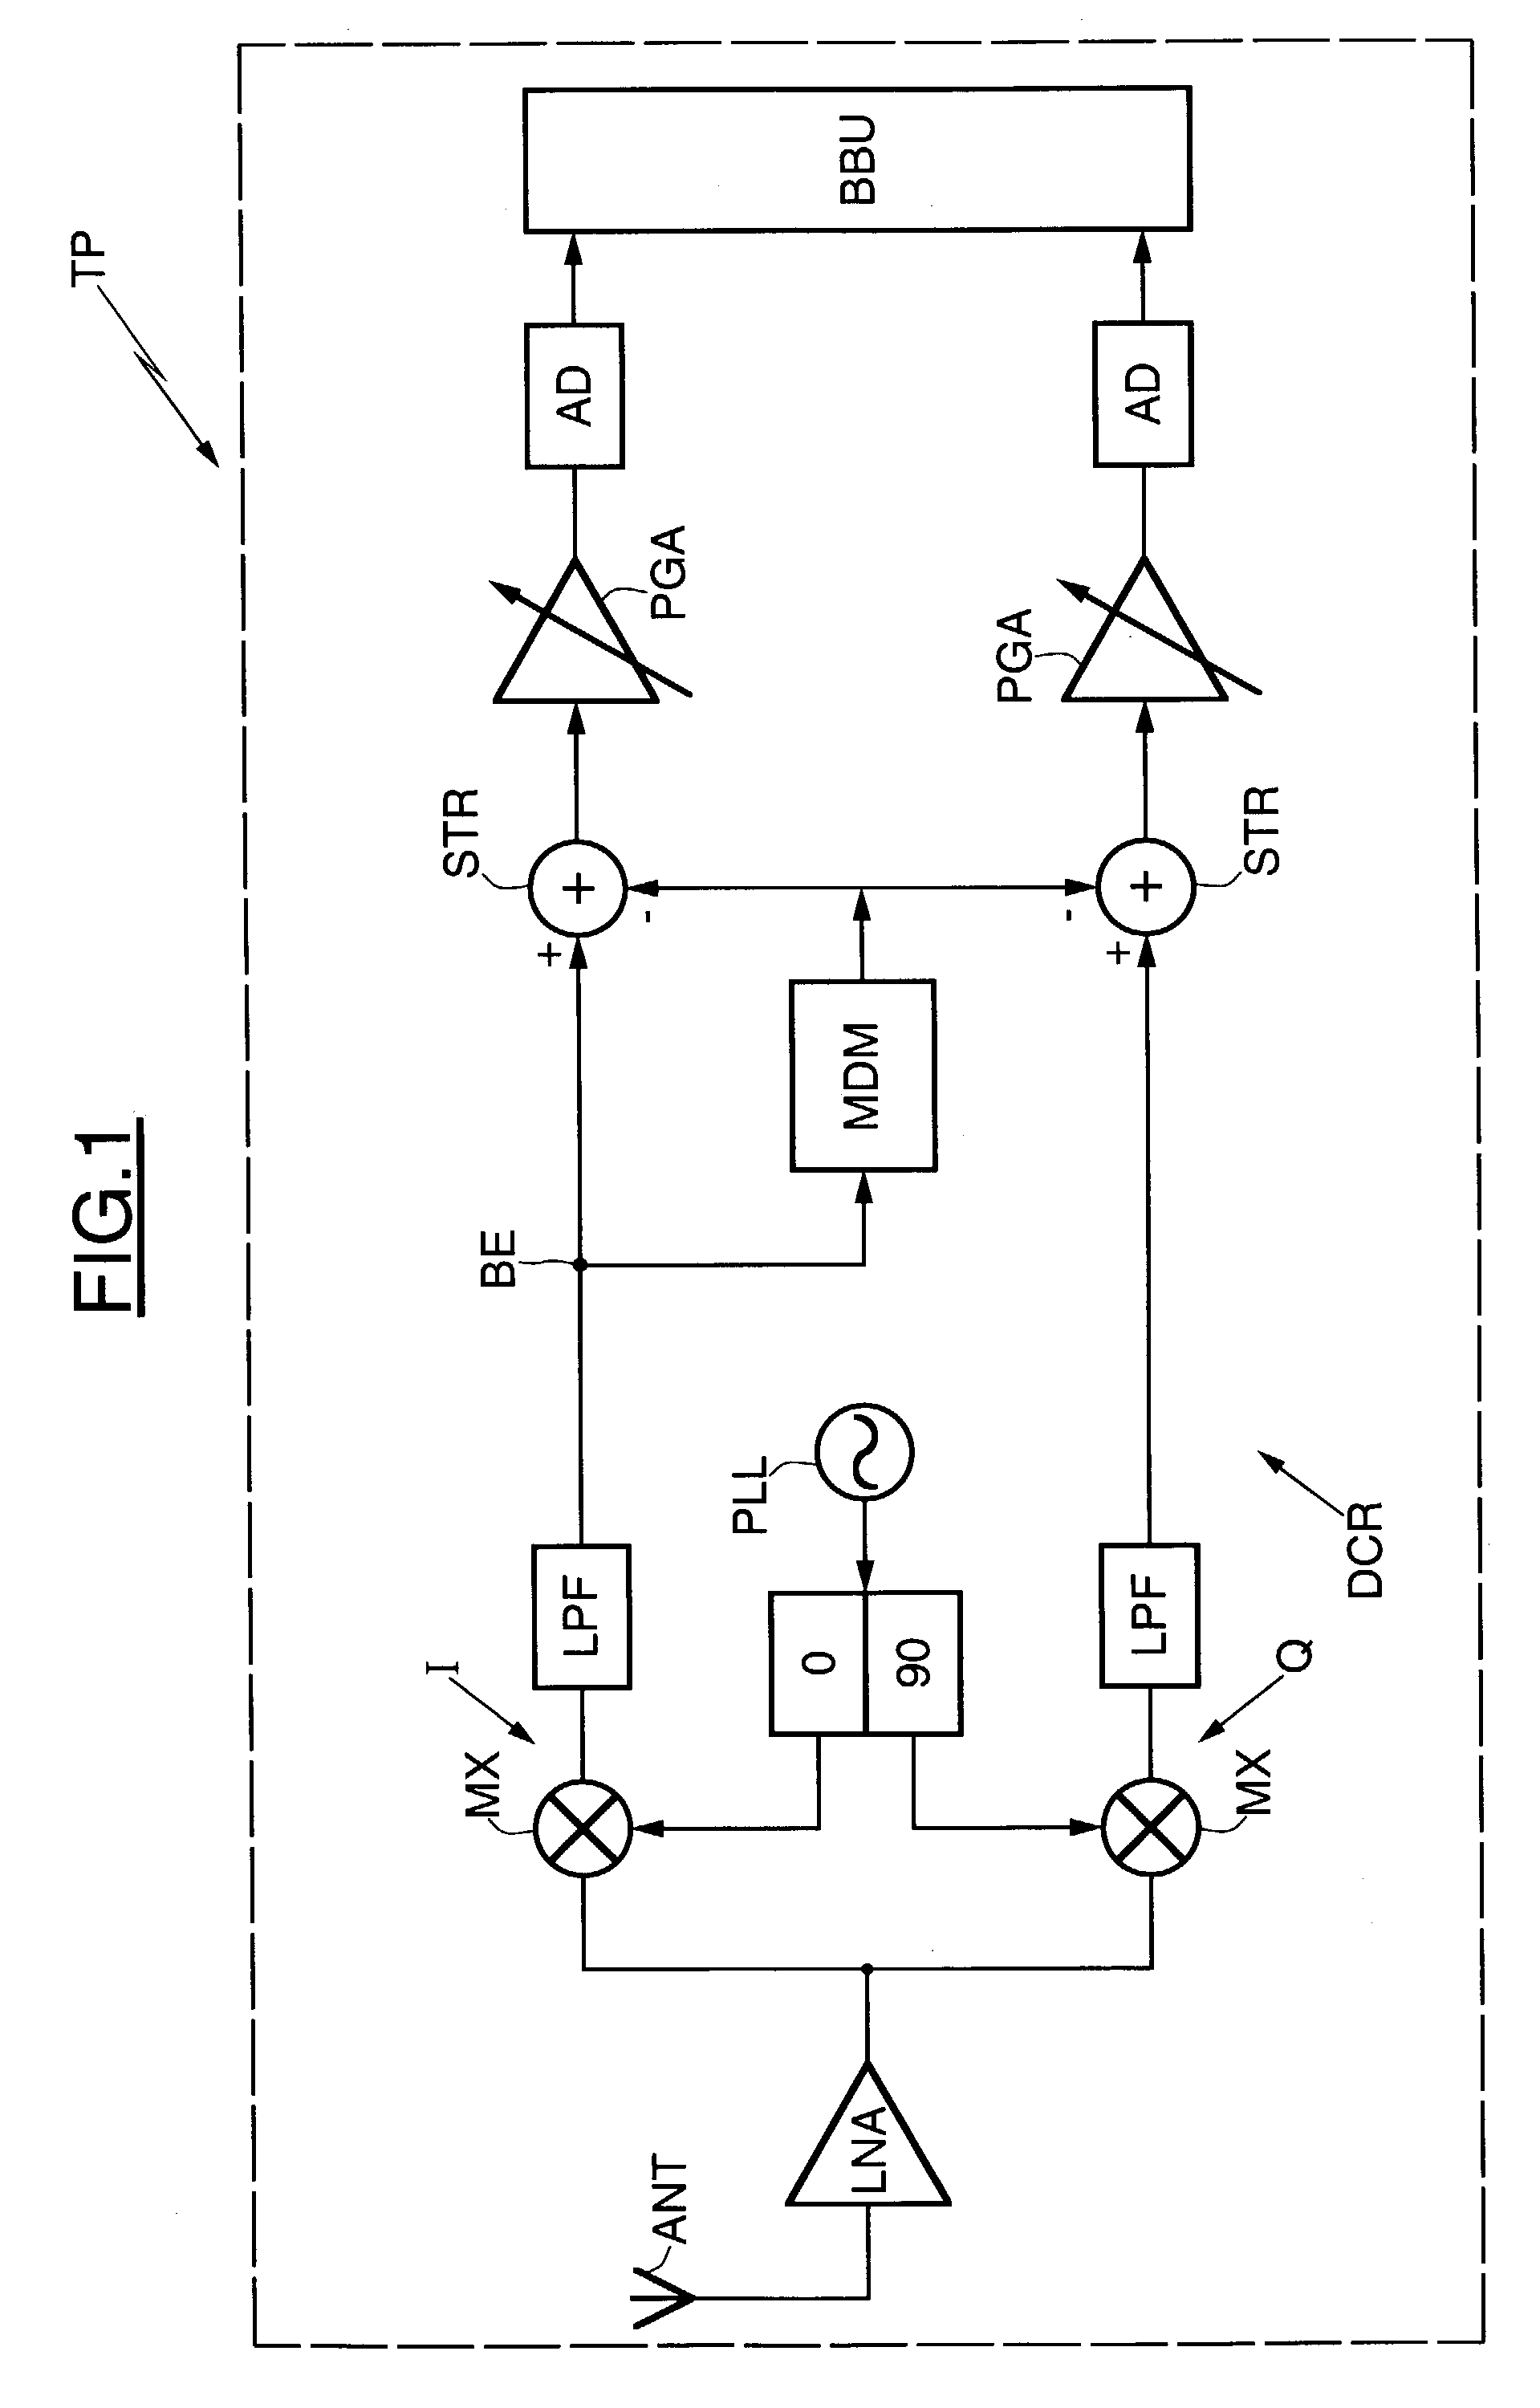 Direct-conversion receiver for a communication system using a modulation with non-constant envelope